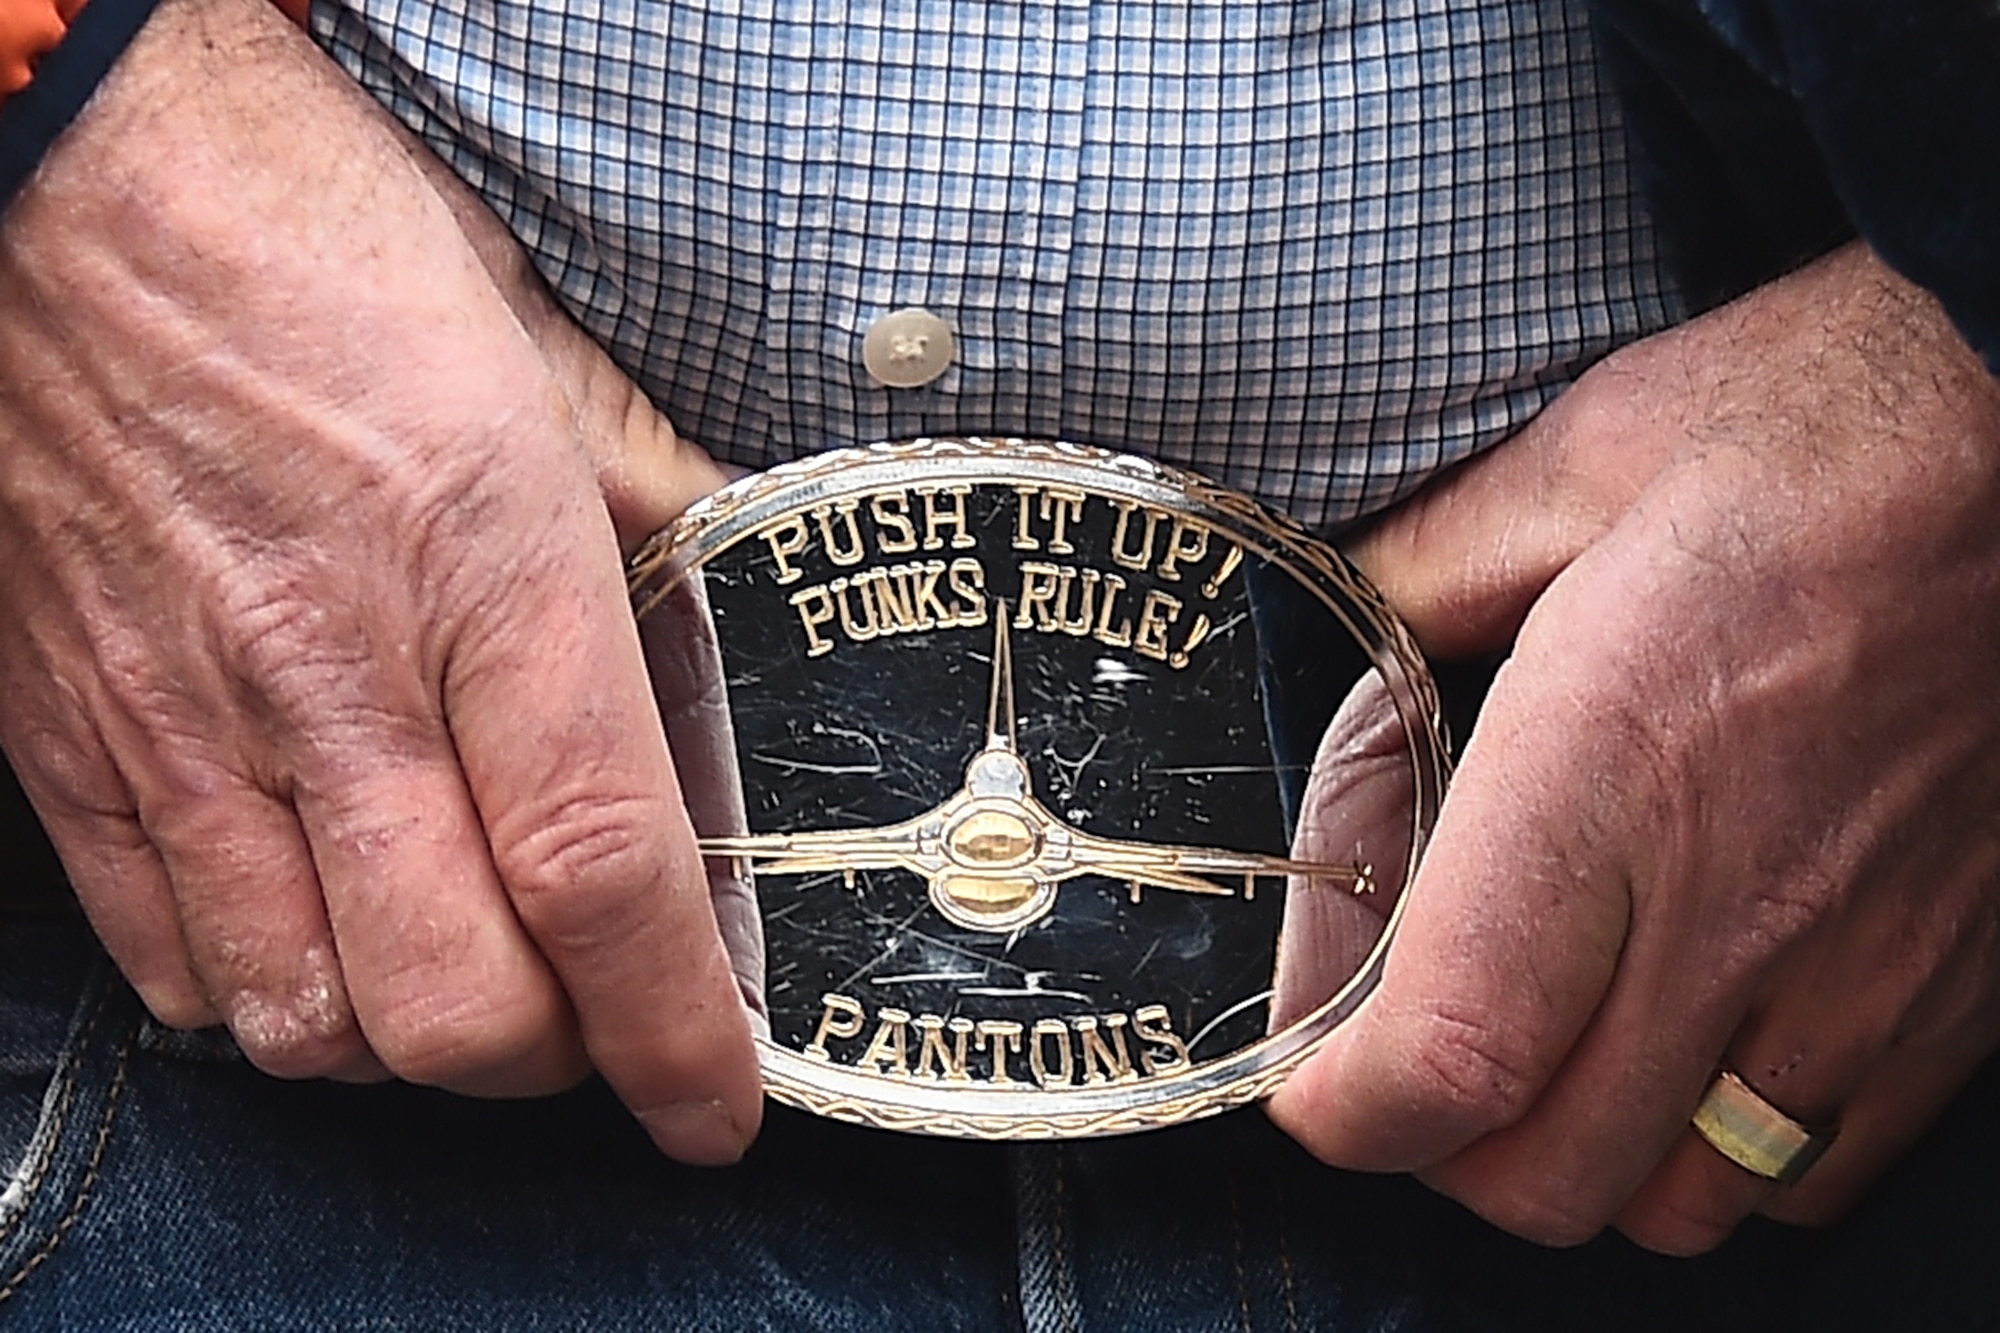 A belt buckle worn by William “Ham” DuBois, the father of Capt. William H. DuBois, is a memento to his son who lost his life in an F-16 Fighting Falcon accident while on deployment. The family of DuBois was presented the game ball before the Denver Broncos playoff game to honor his service and sacrifice.  (U.S. Air Force photo by Airman 1st Class Luke W. Nowakowski/Released)